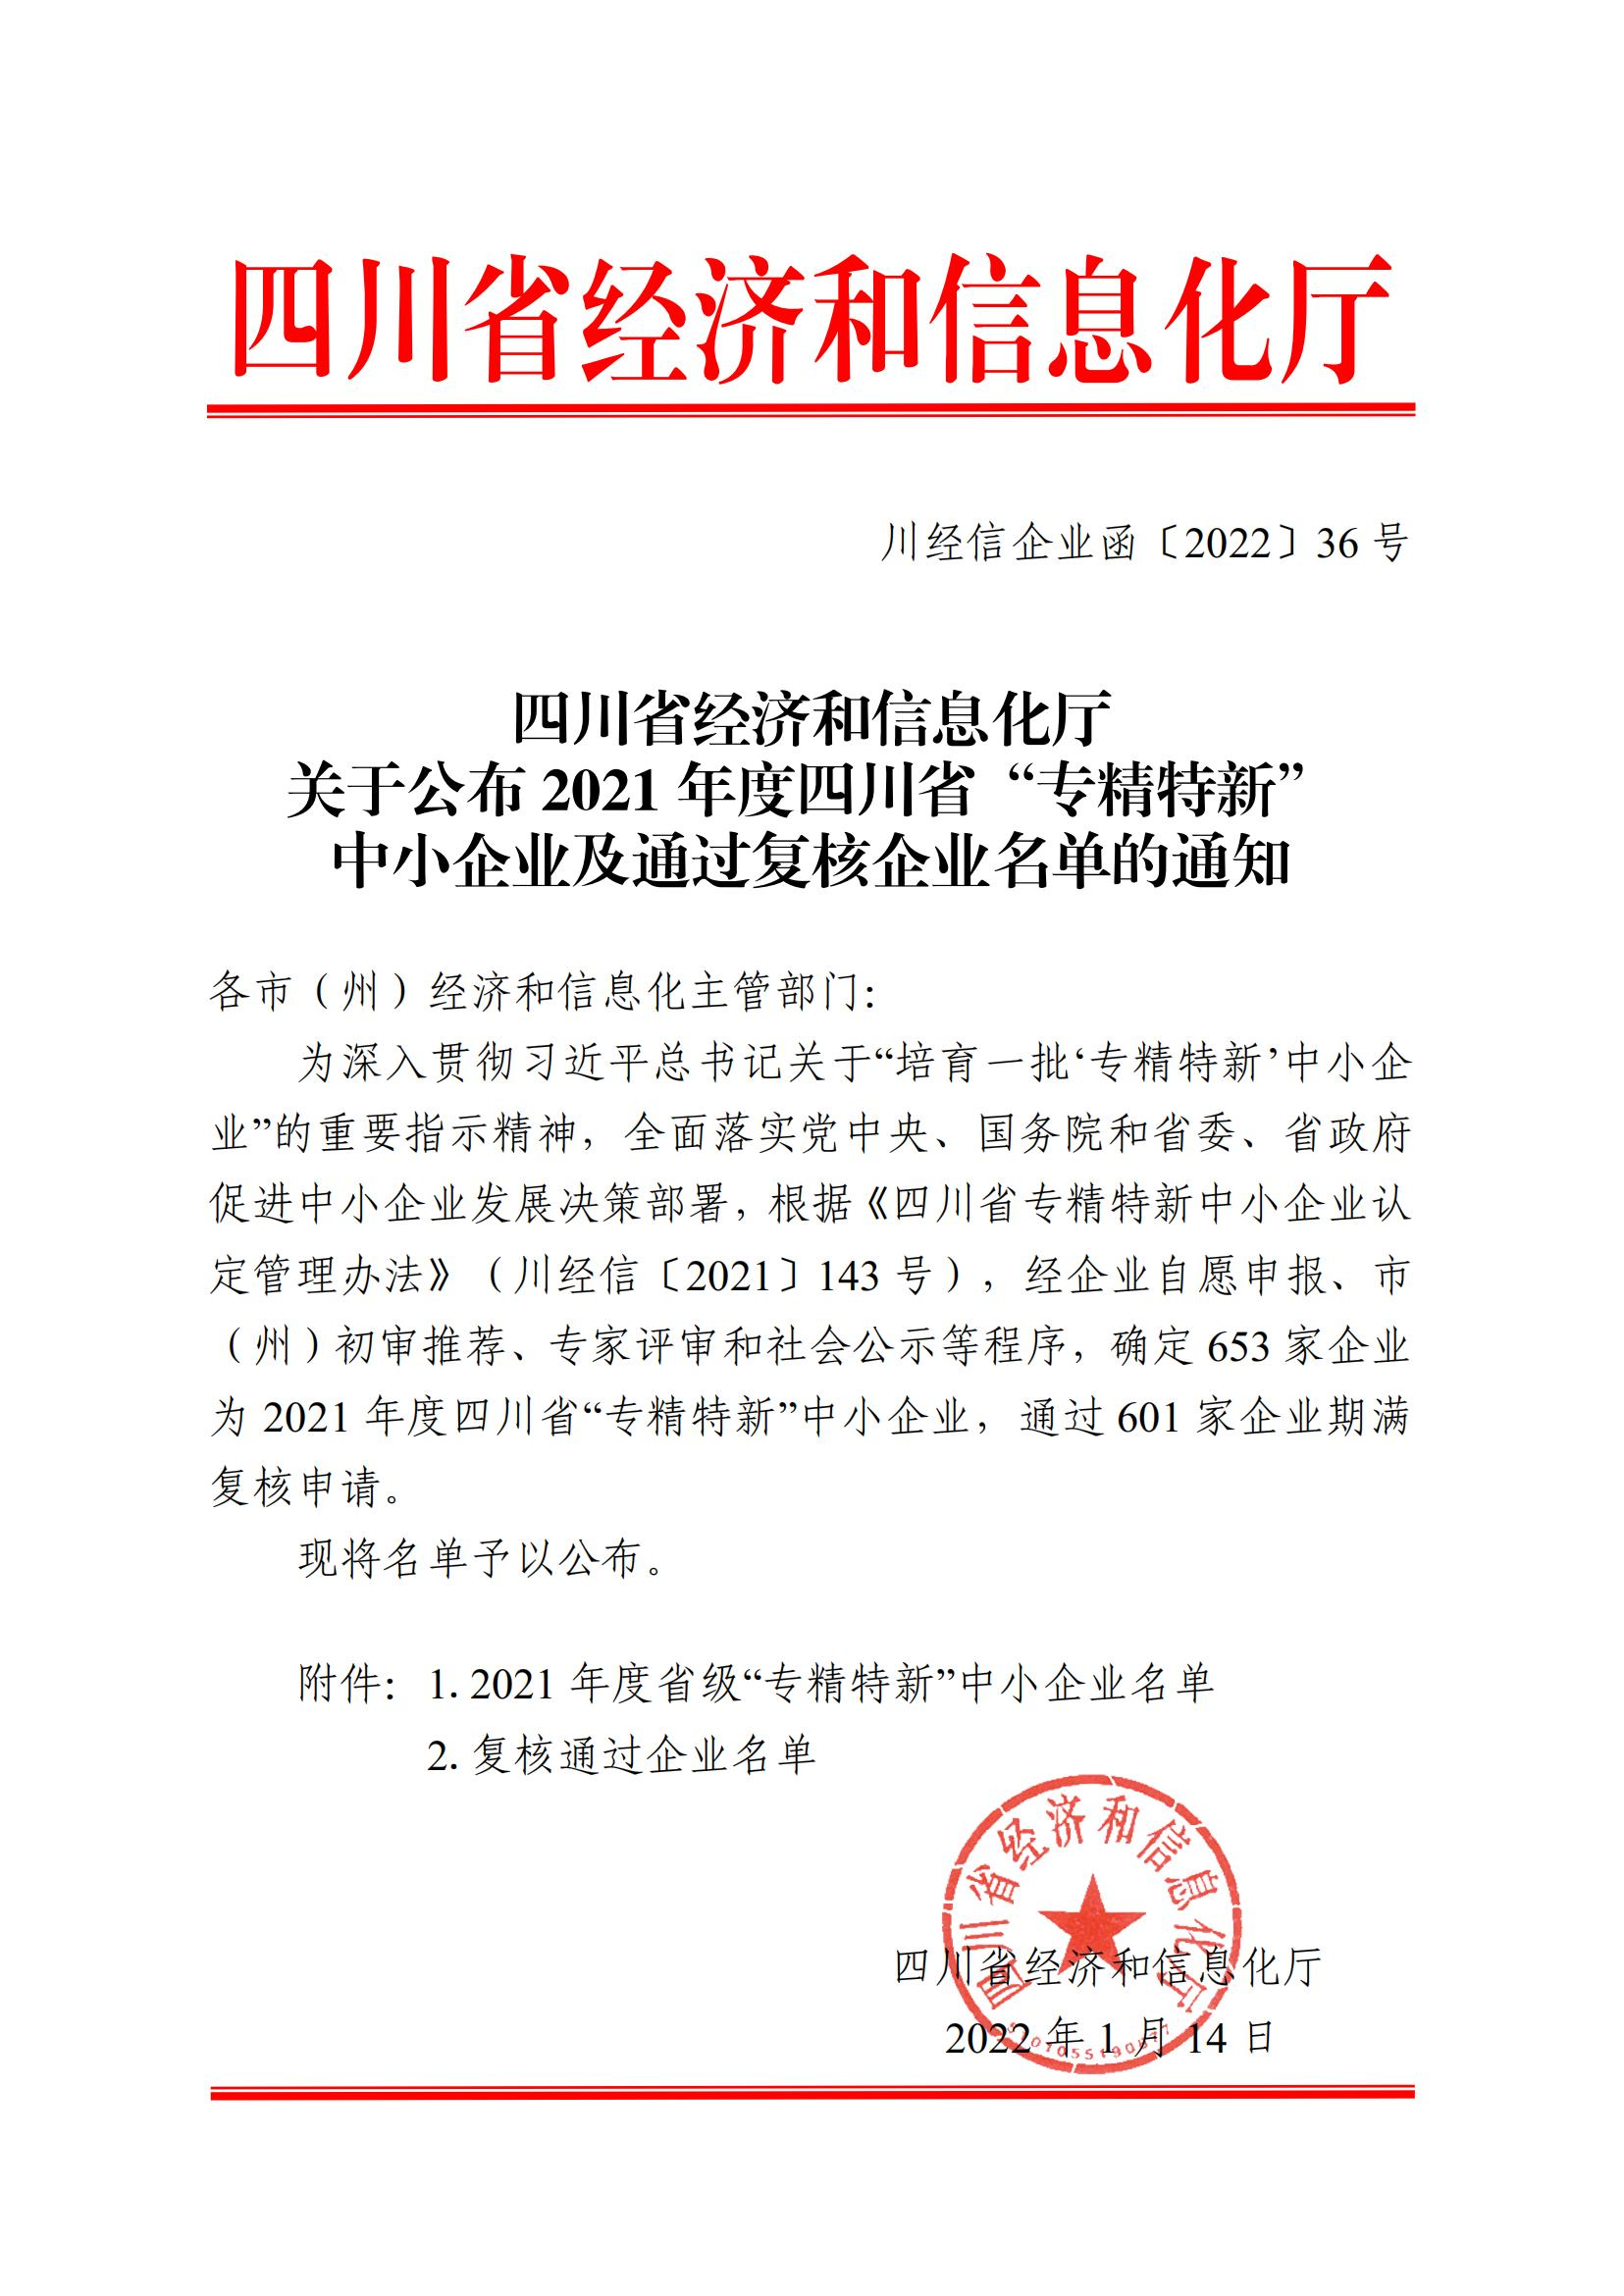 Notice of the Sichuan Provincial Department of Economy and Information Technology on the announcement of the list of "specialized, refined, and new" small and medium-sized enterprises in Sichuan Province in 2021 and the enterprises that have passed the review